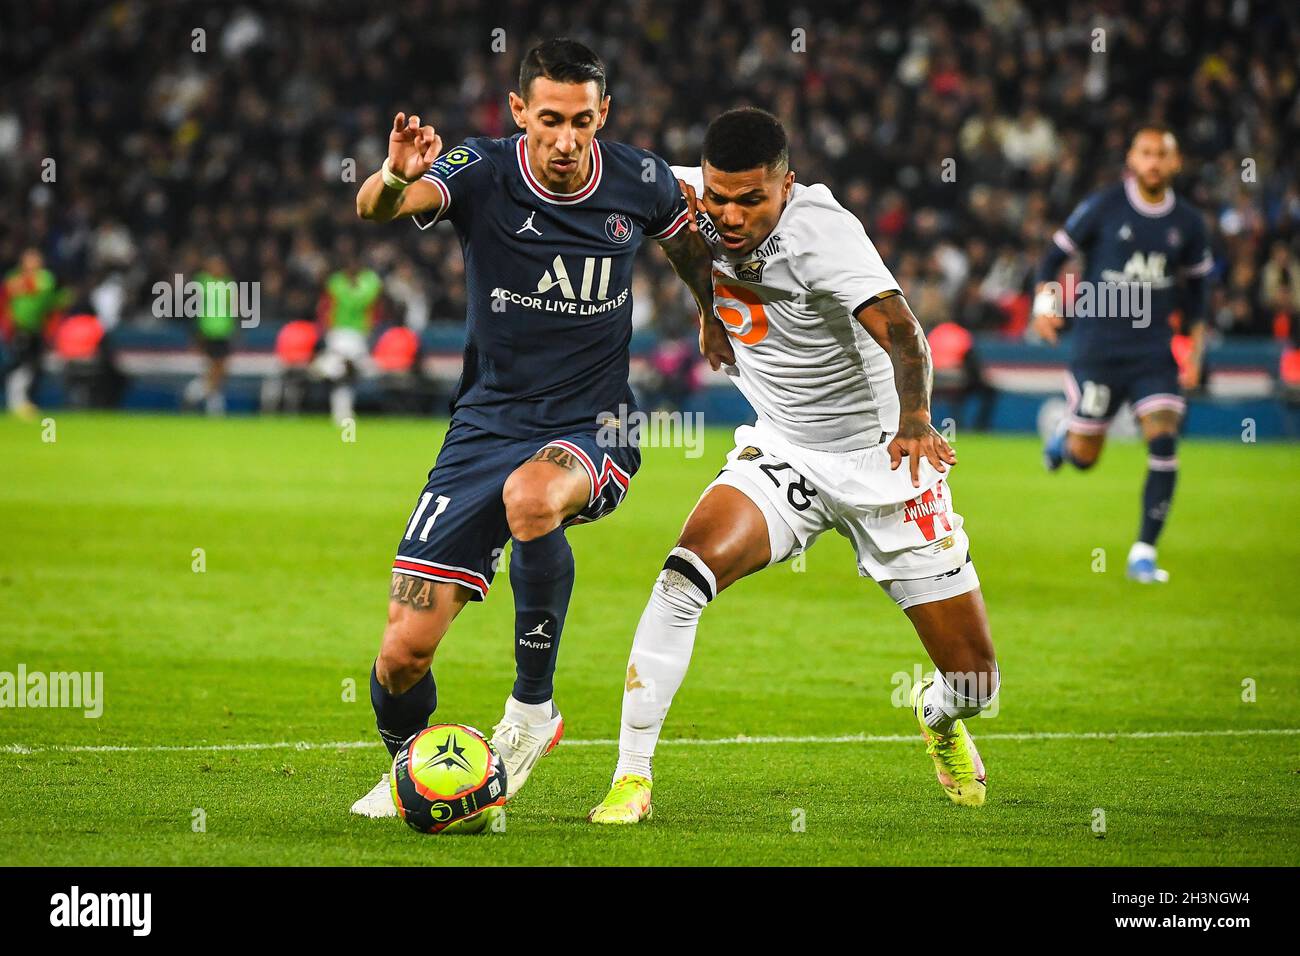 Paris, France. 29th Oct, 2021. Angel DI MARIA of PSG and REINILDO of Lille  during the Ligue 1 match between Paris Saint-Germain (PSG) and Lille OSC  (LOSC) at Parc des Princes stadium